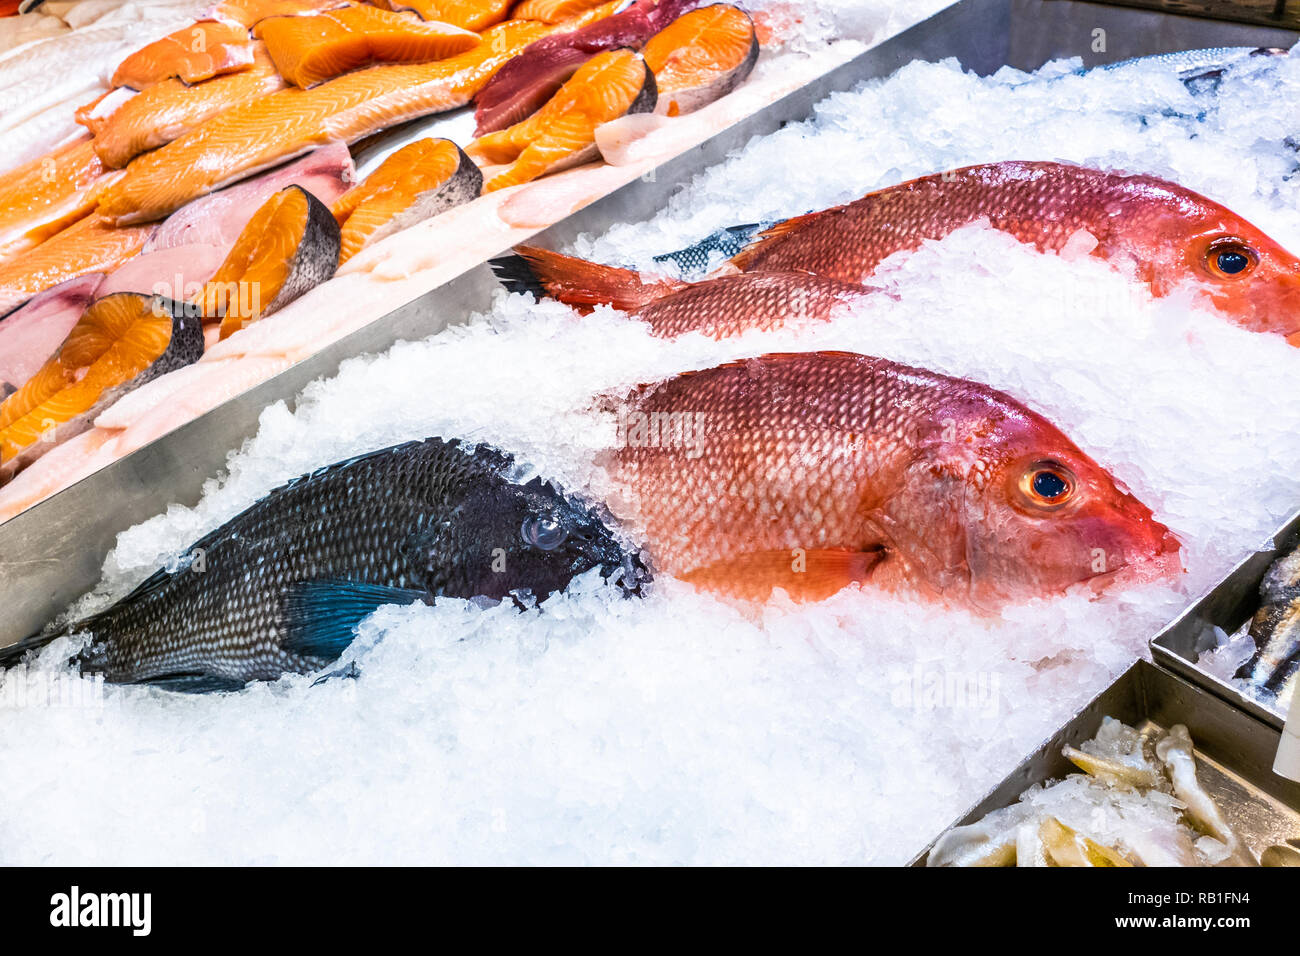 Variety of Raw Fresh Fish preserved on ice Stock Photo